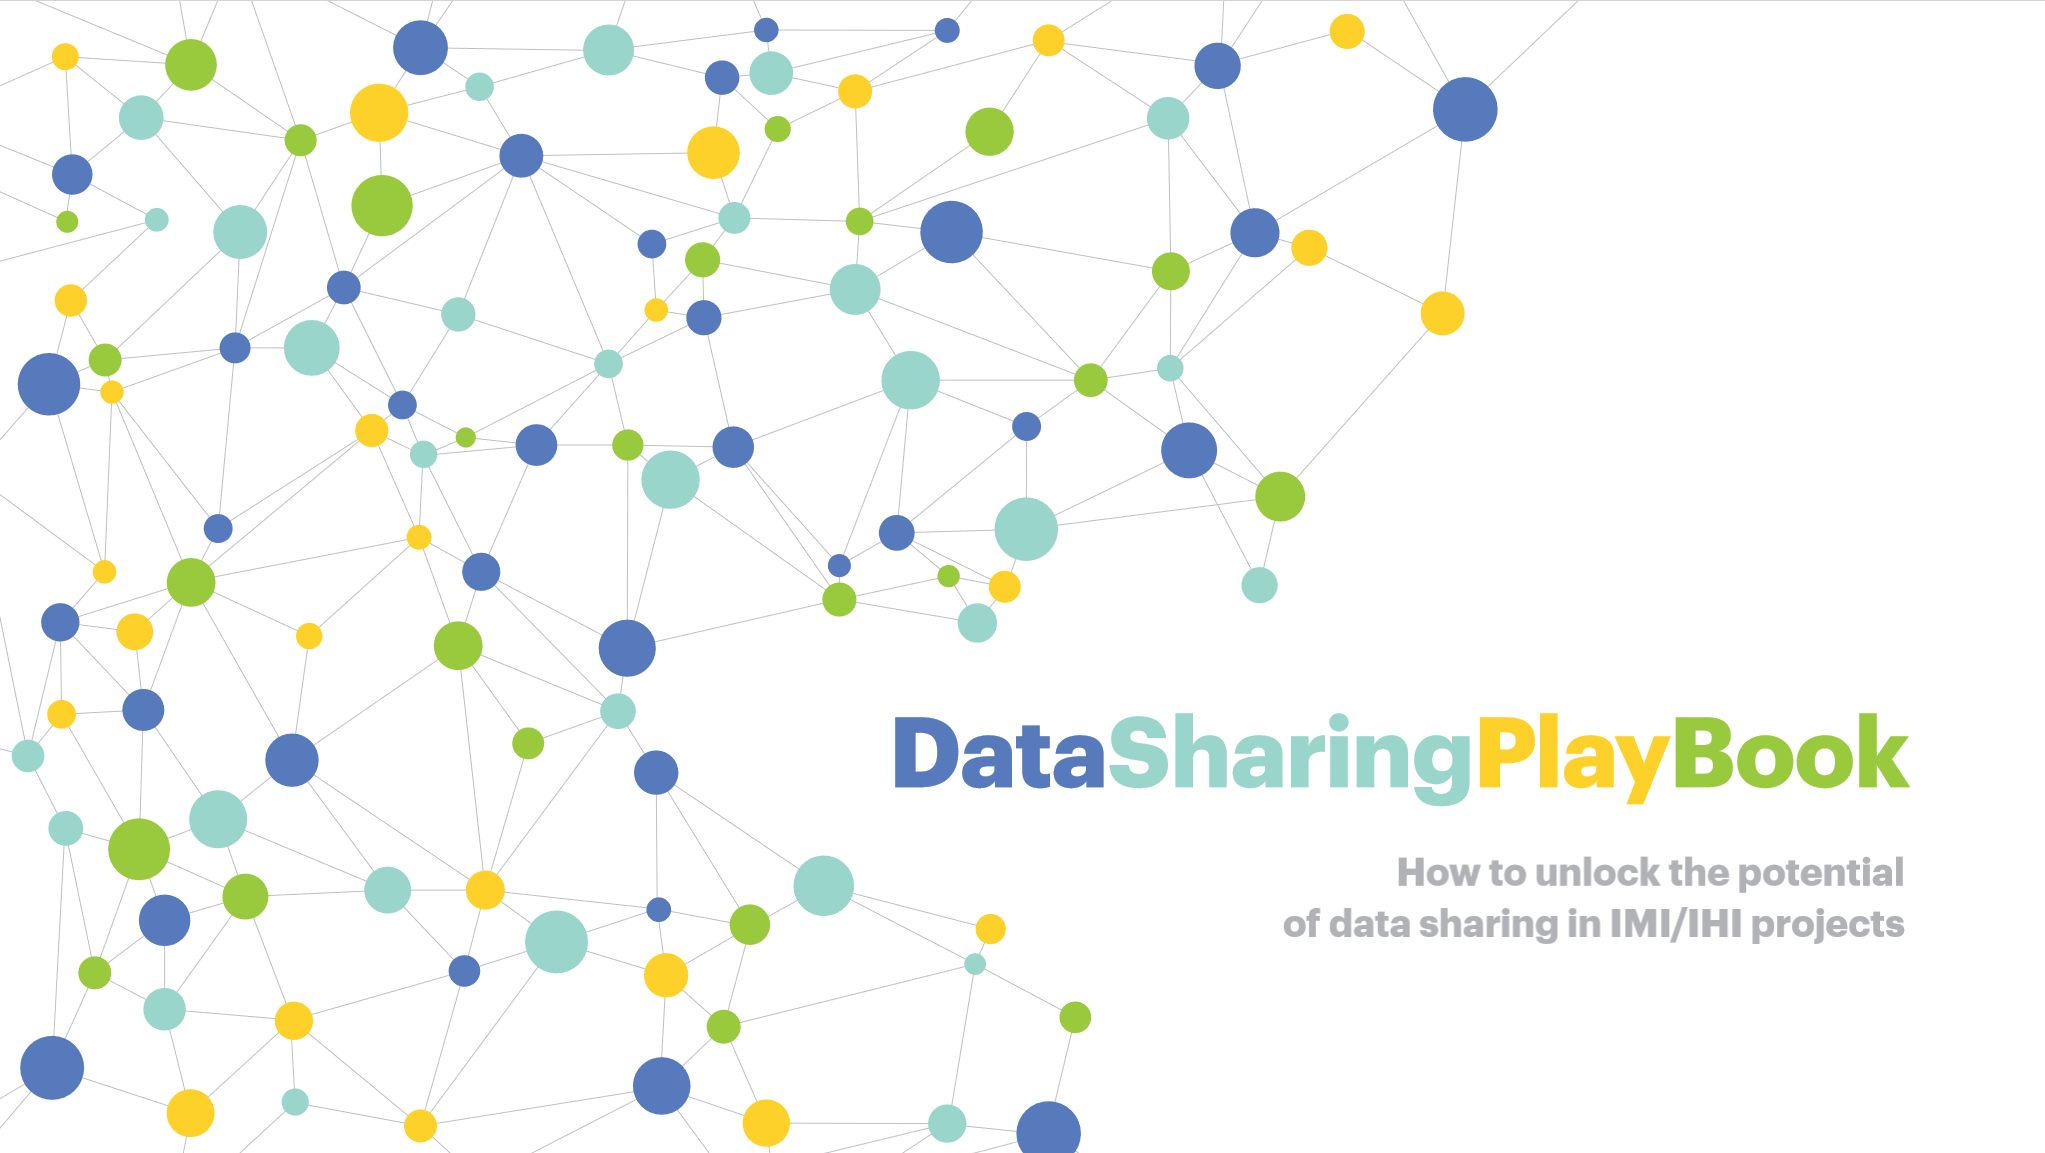 The cover of the Data Sharing Playbook